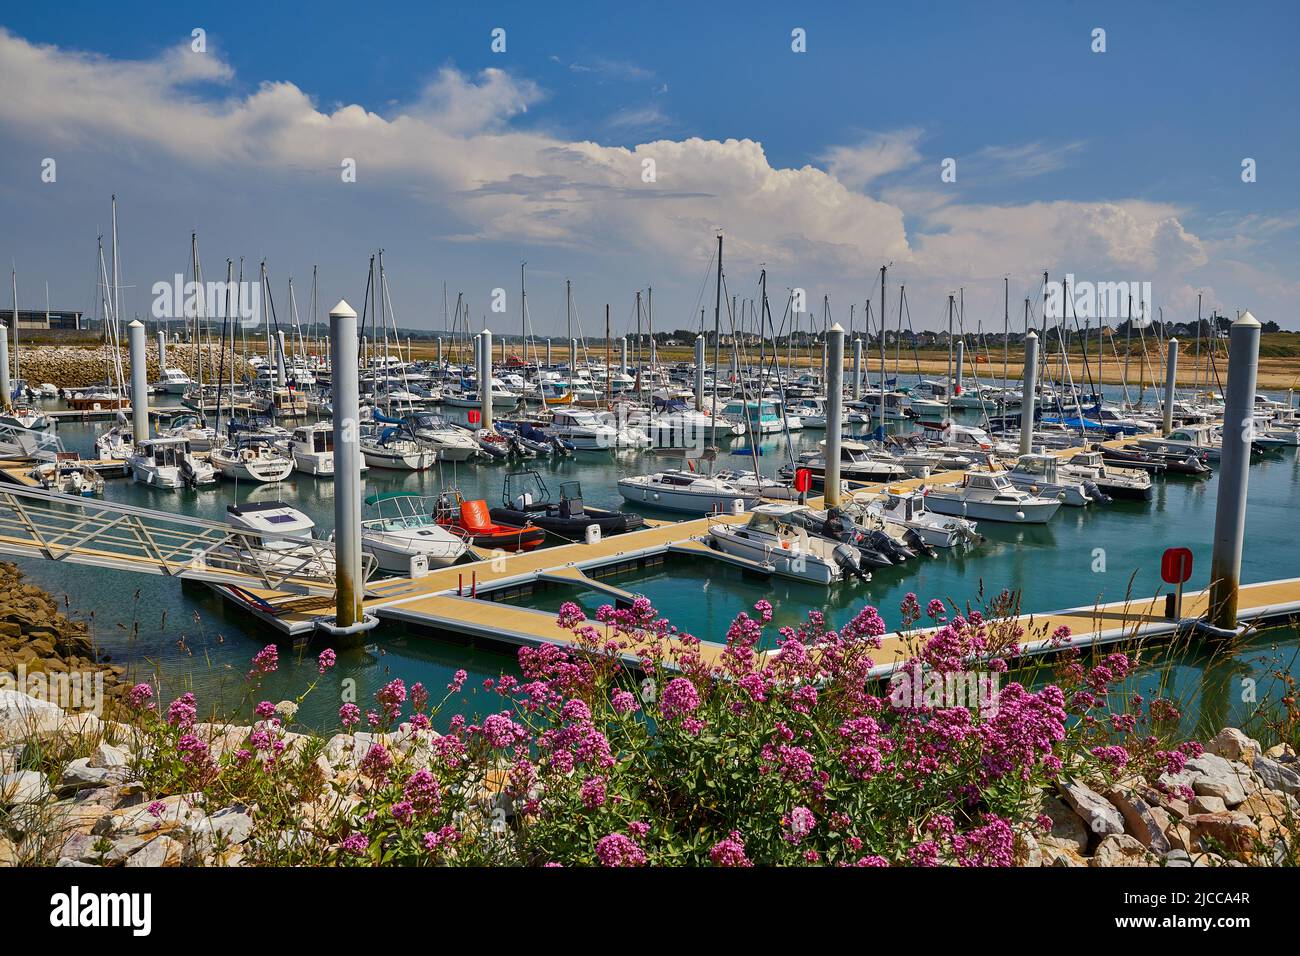 Image of Carteret Marina on a sunny day with flowers in the foreground. Stock Photo